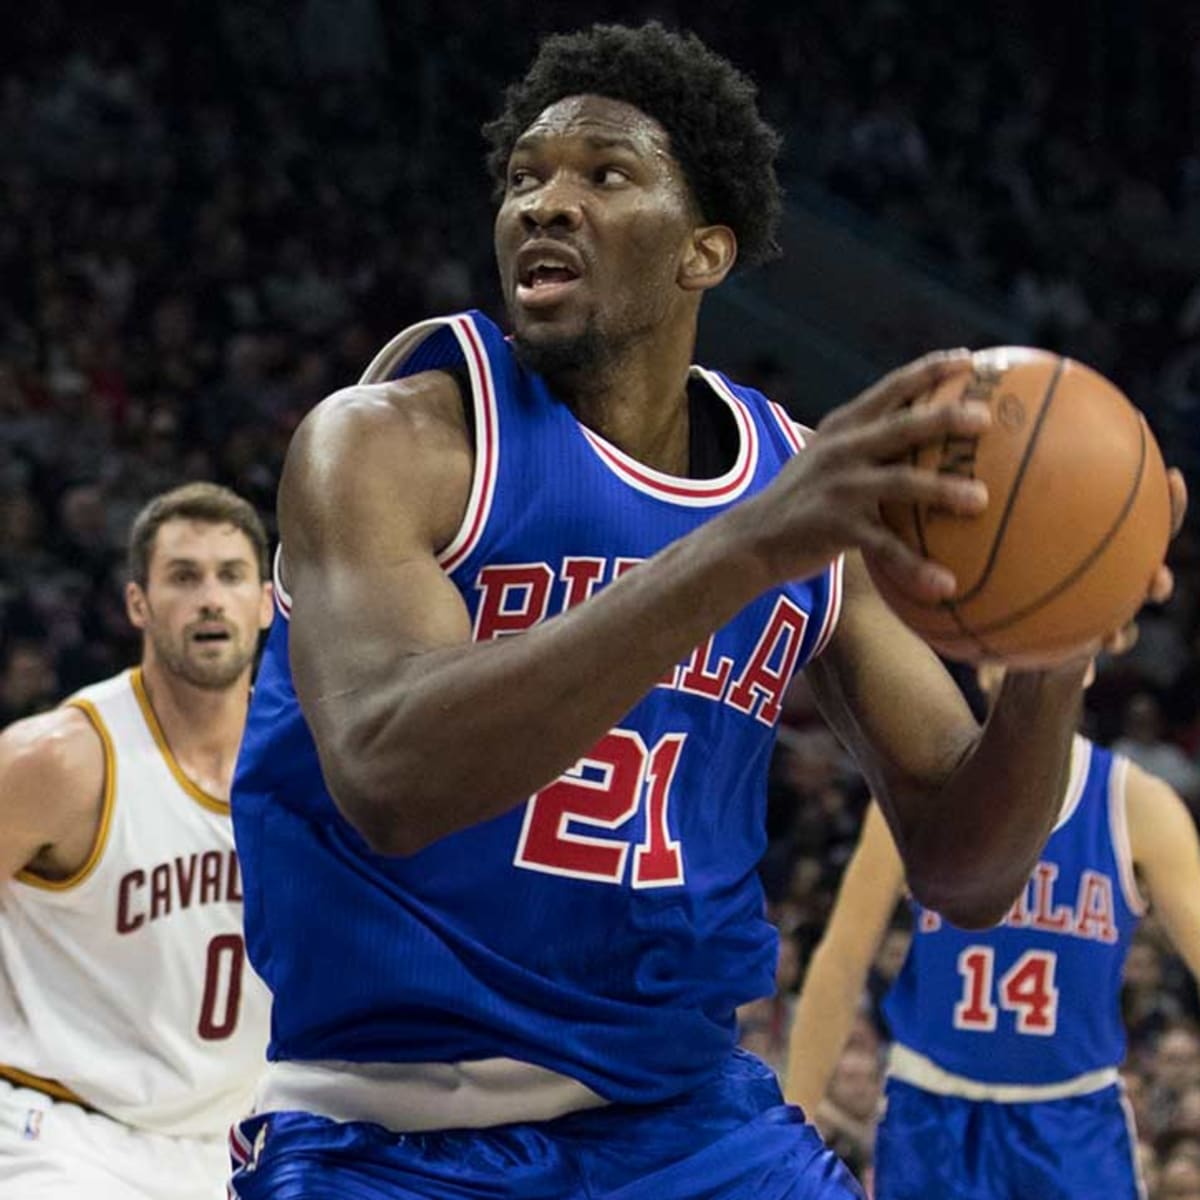 Can Joel Embiid win Rookie of the Year?